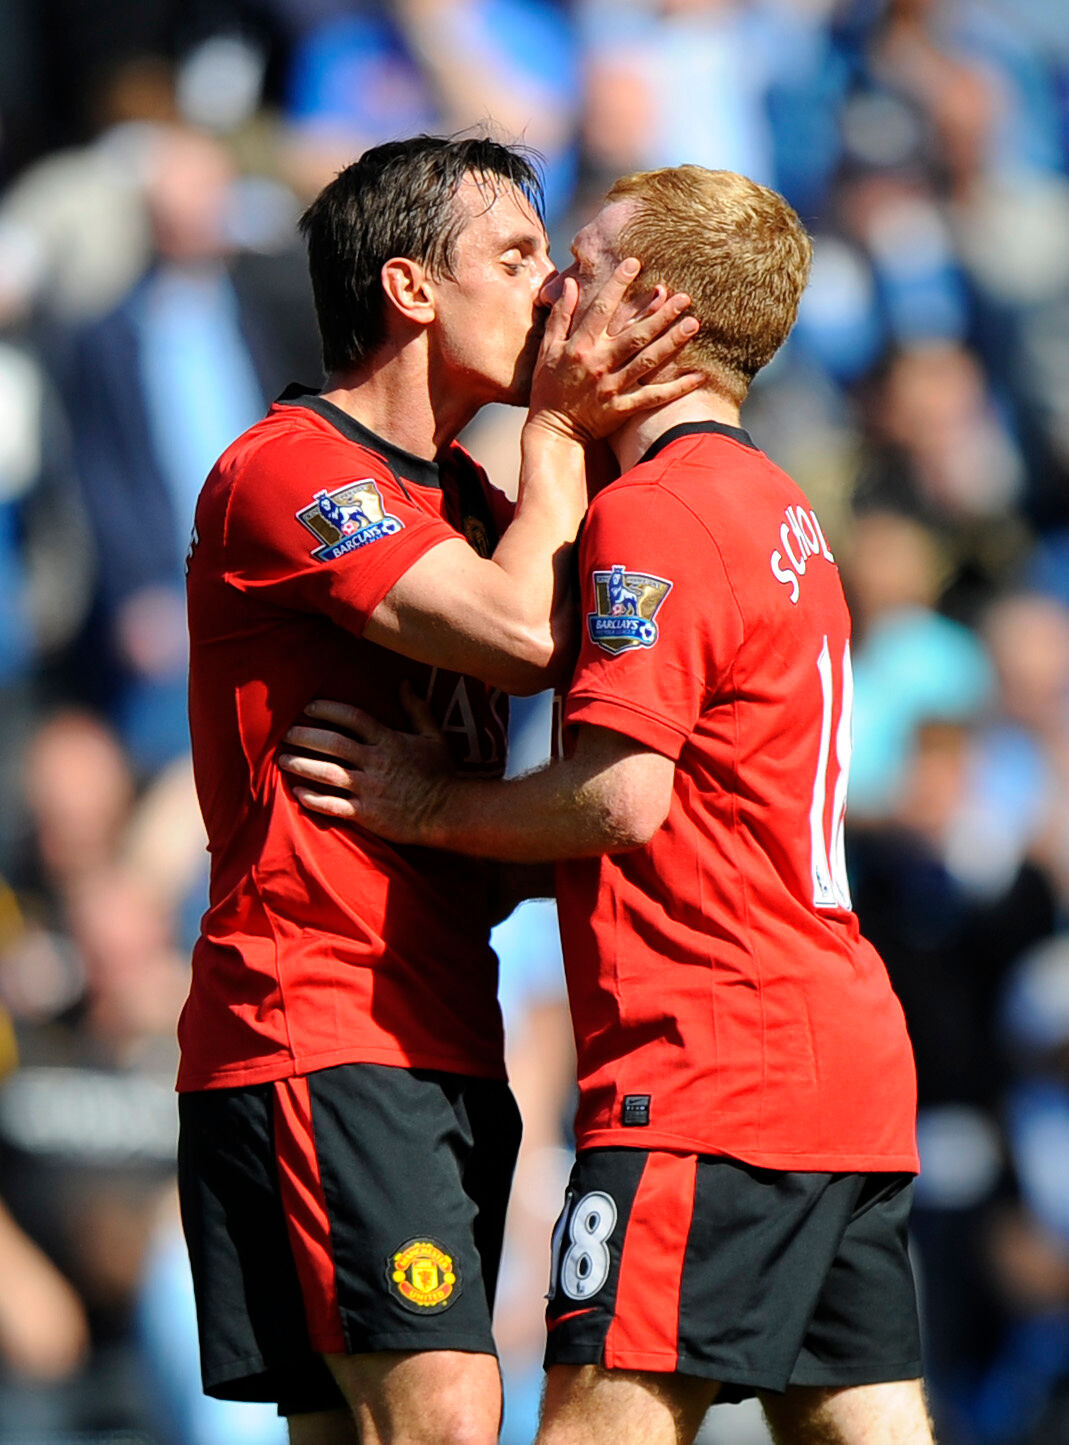 Gary Neville kisses scorer of the winning goal Paul Scholes of Manchester United at the end of a match on the field. 